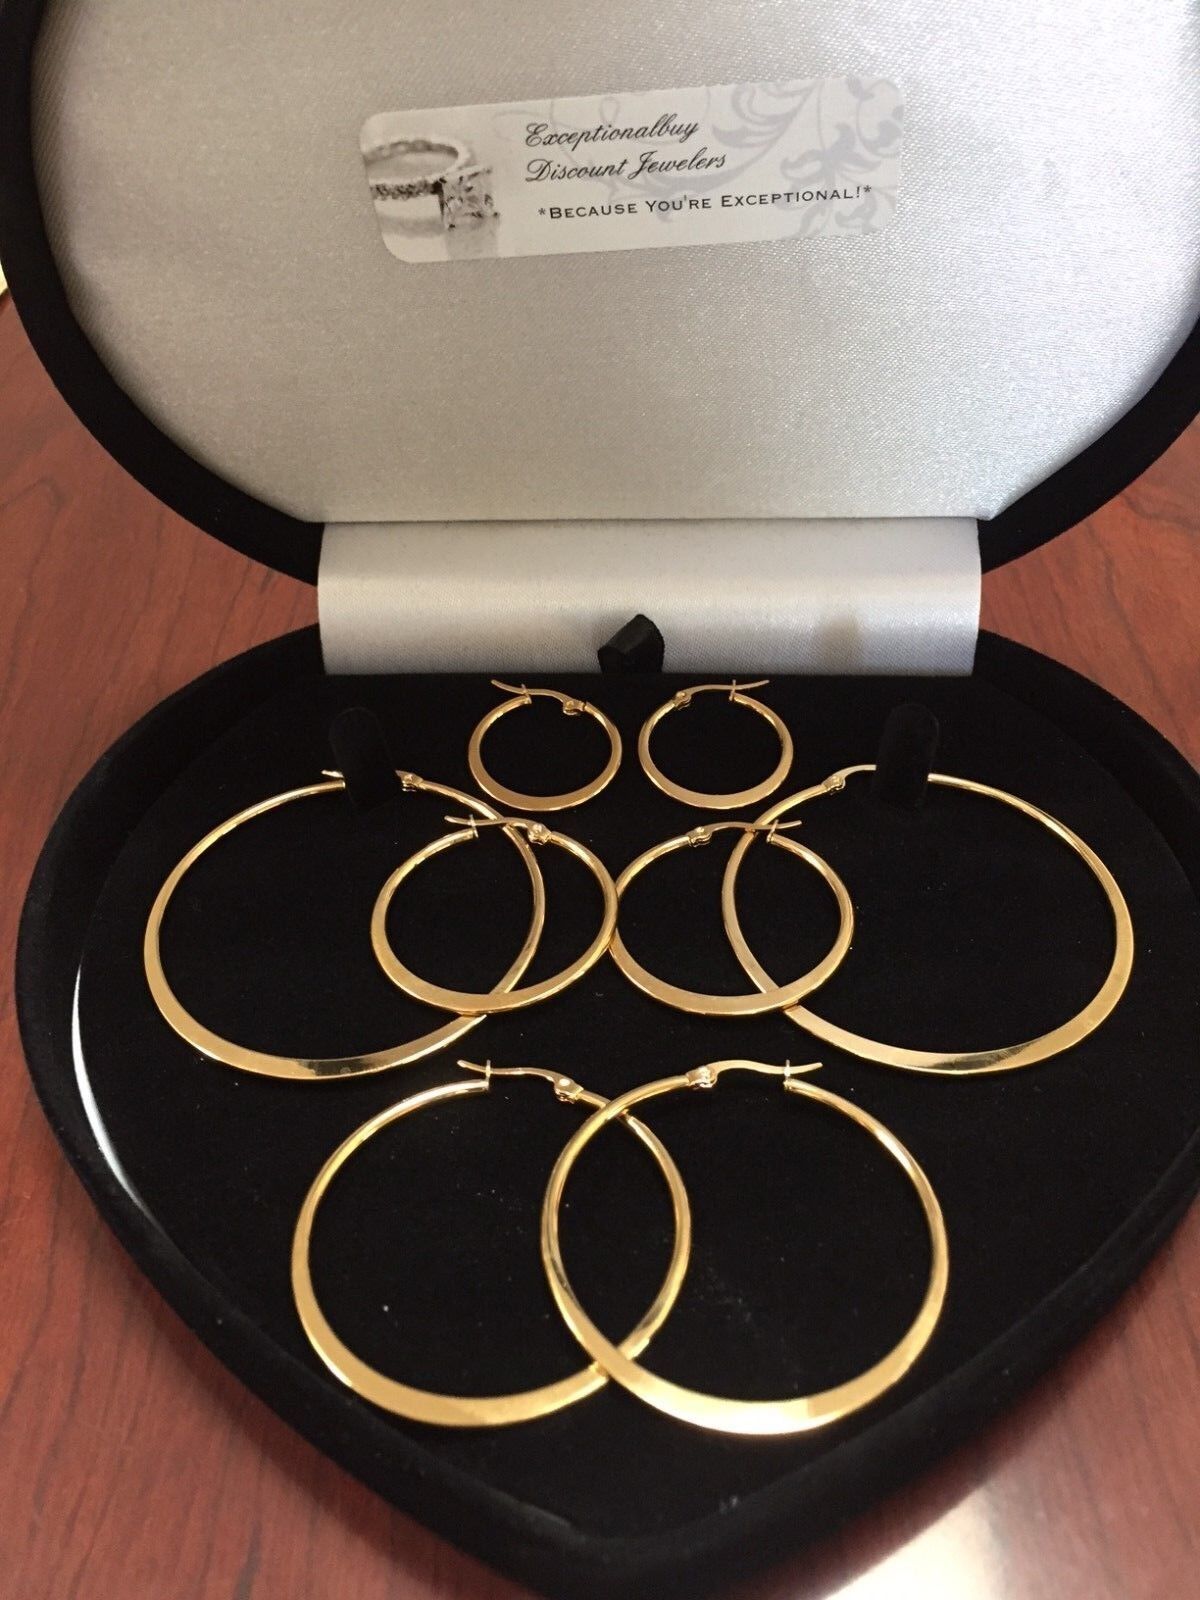 1 INCH  14KT GOLD & STS TWISTED SHINY ROUND HOOP EARRINGS + BONUS!  SPECIAL! EXCEPTIONALBUY - фотография #5